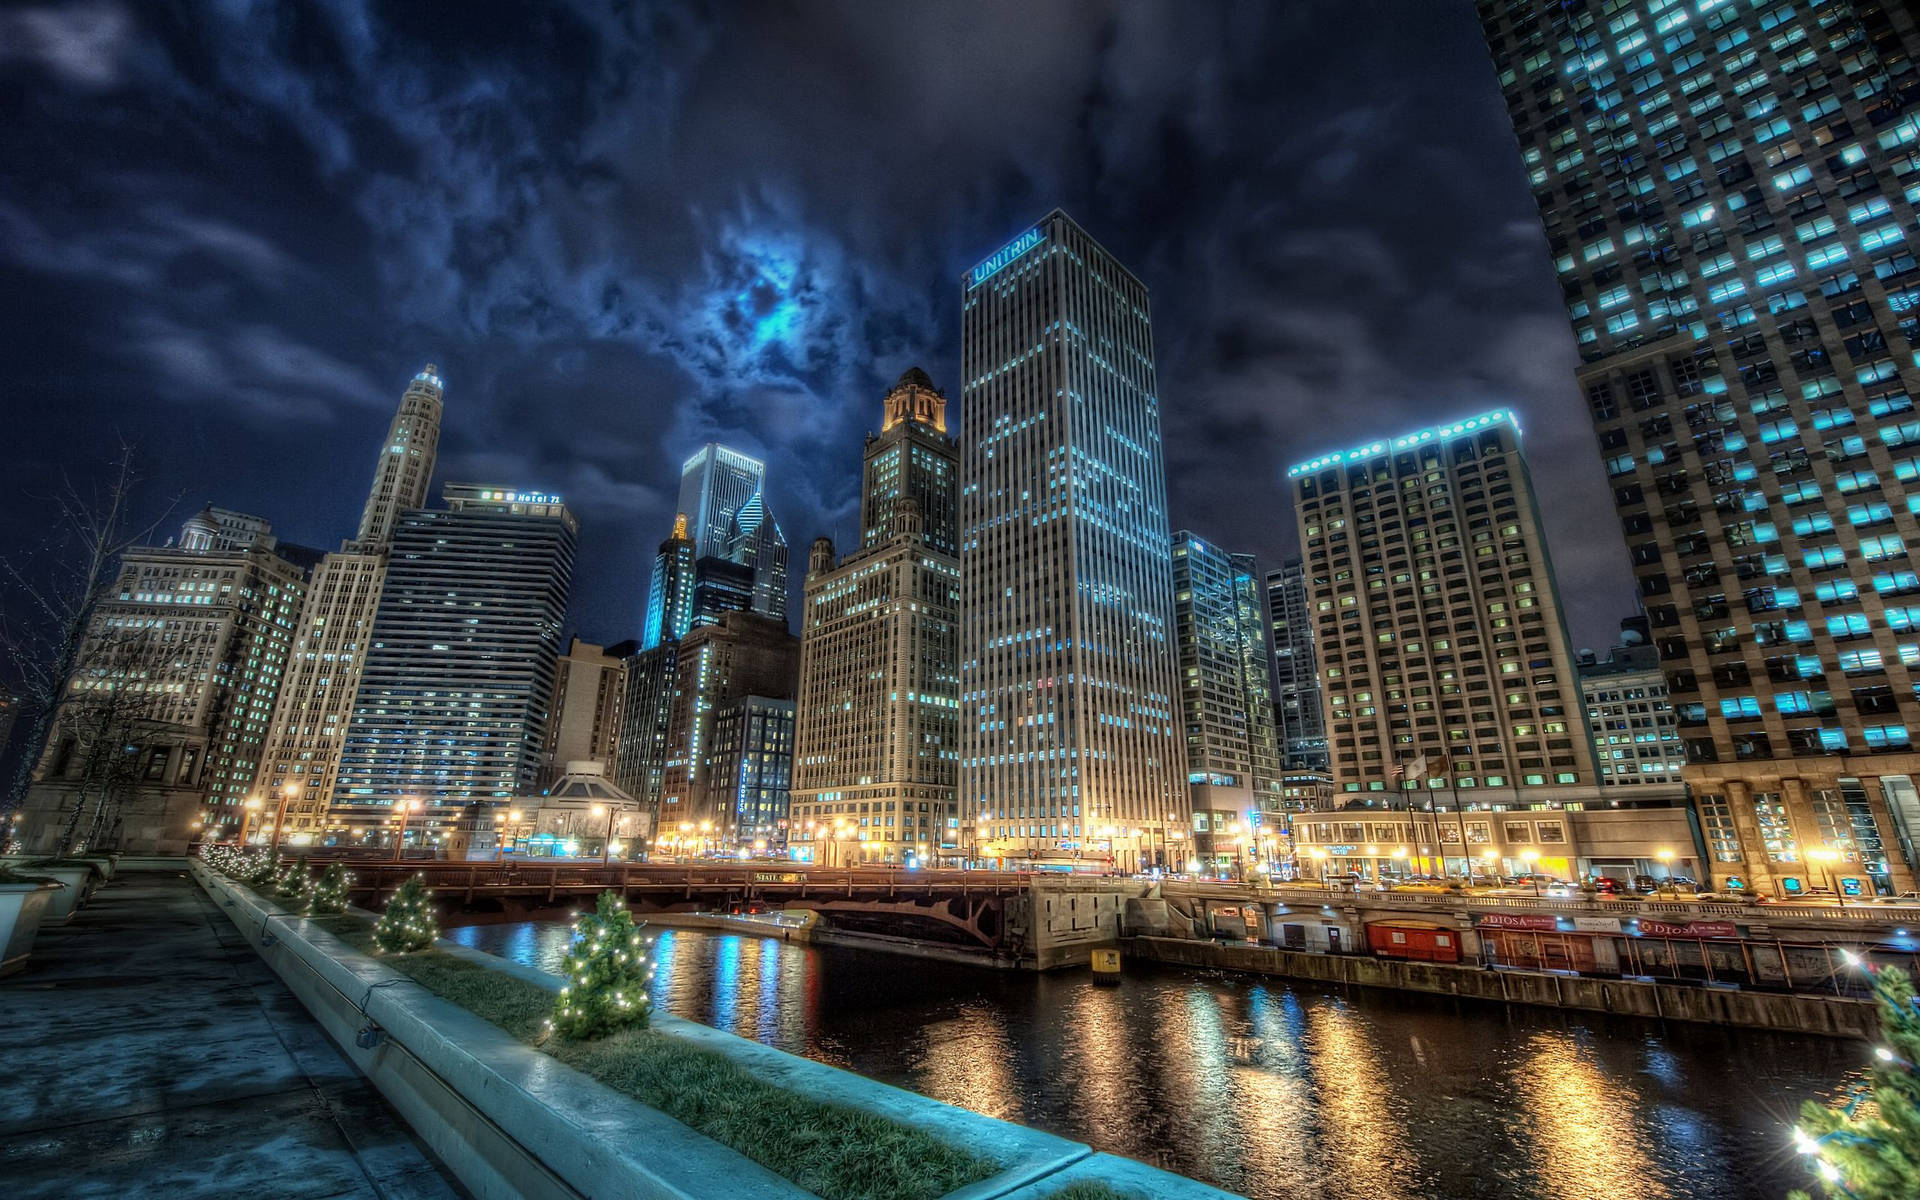 The American Night Sky Of Chicago Background